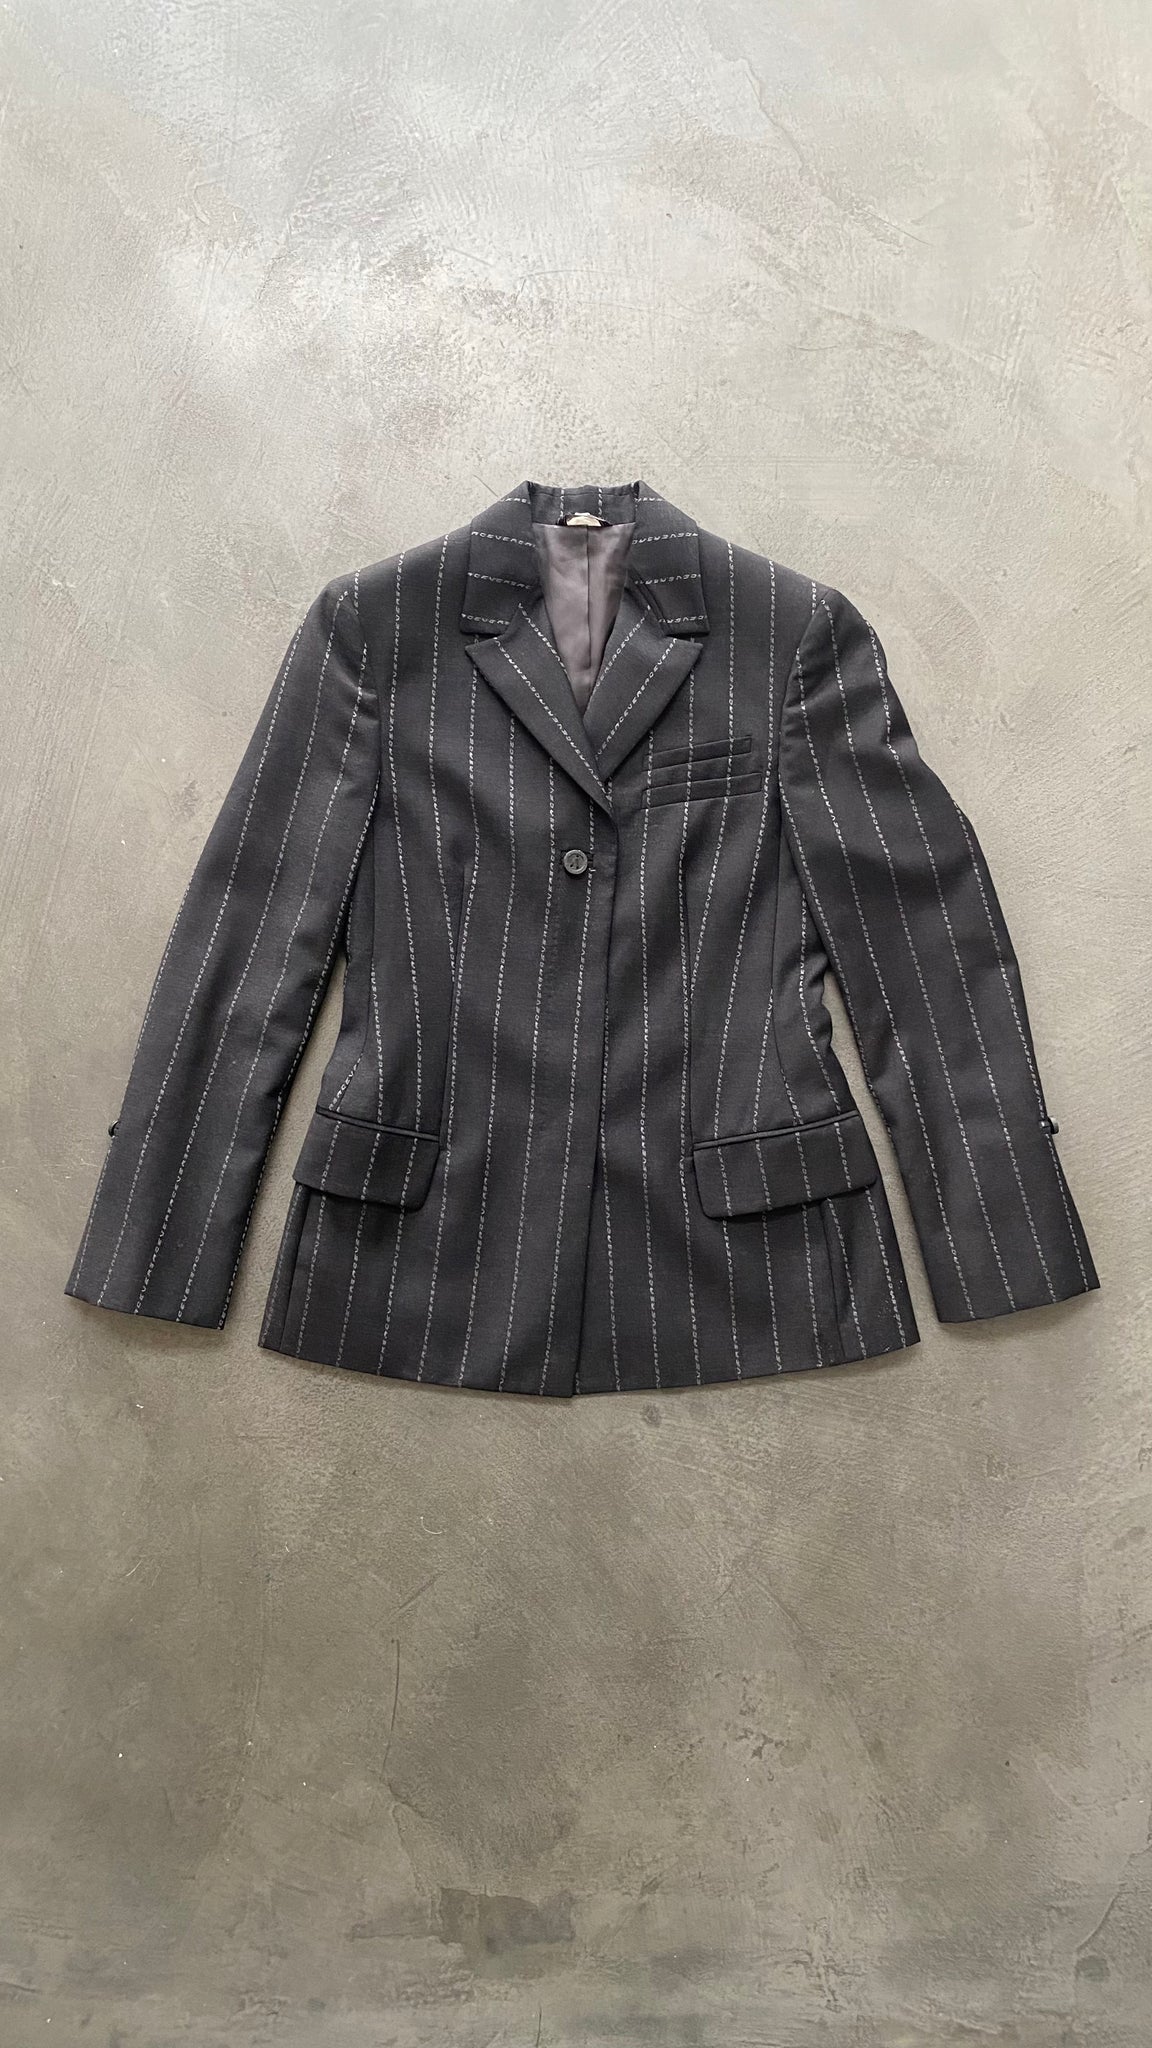 Gianni Versace Couture Logo Pinstripe Skirt Suit